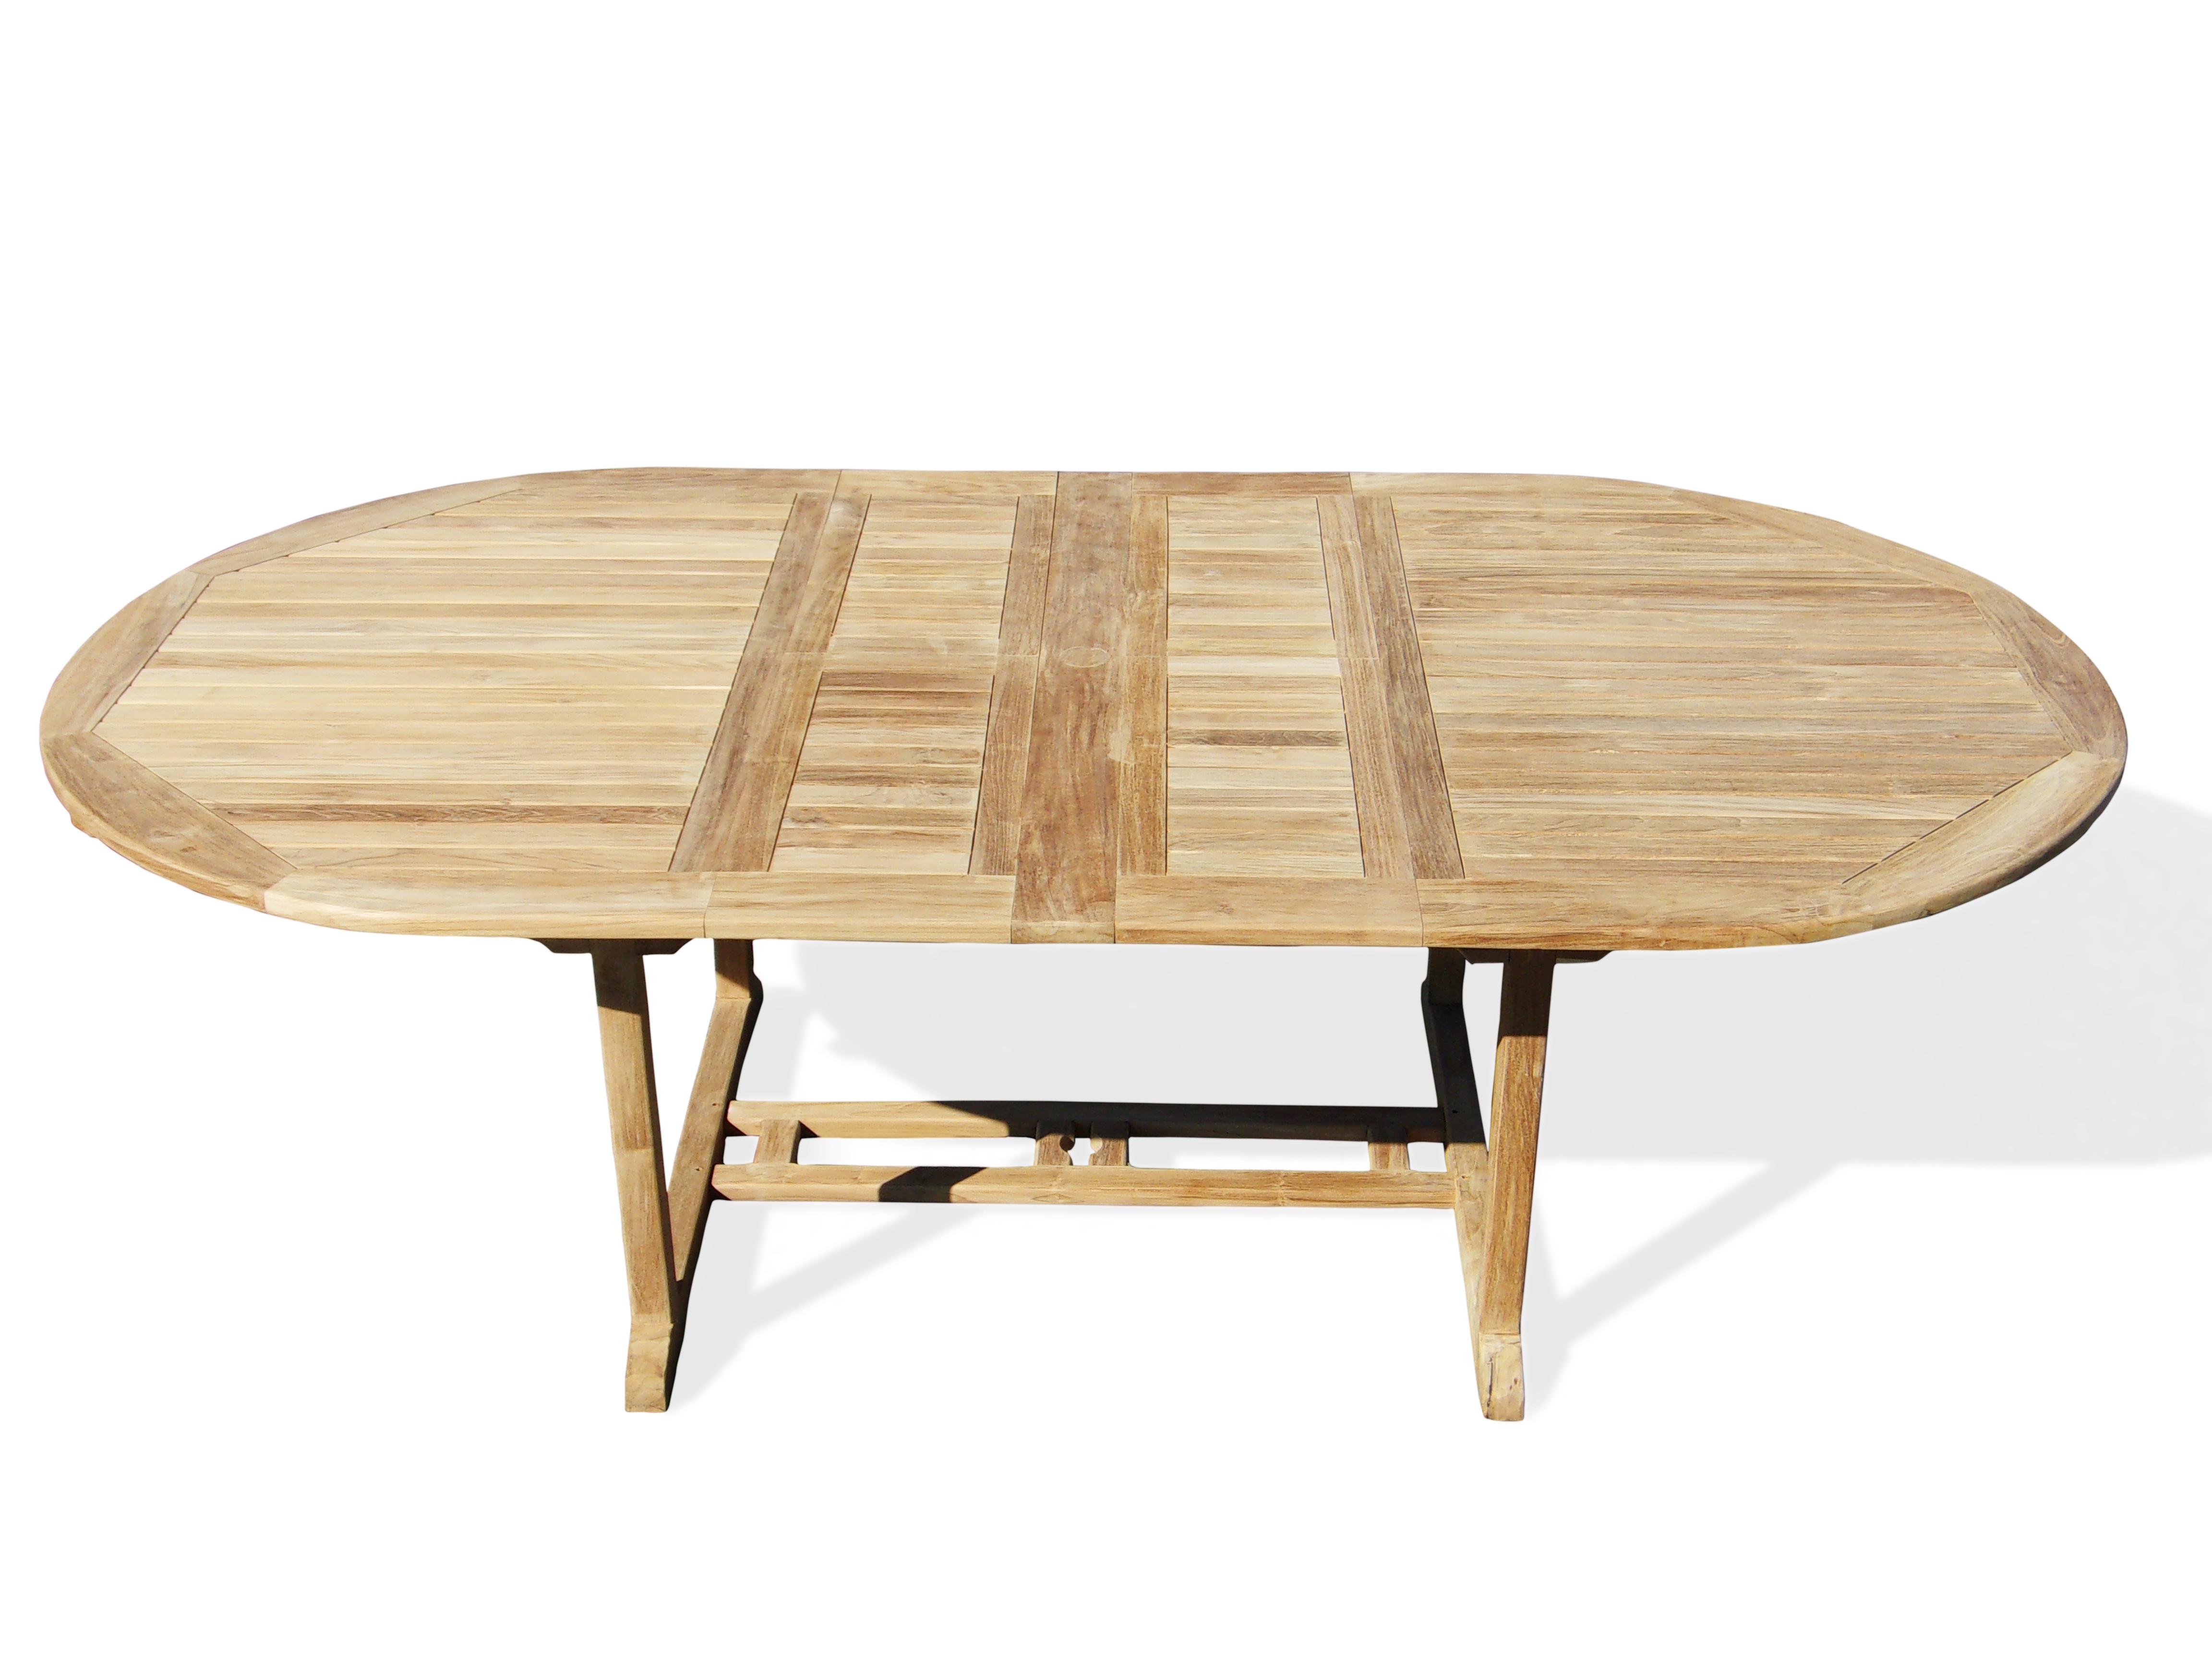 Extra Wide Oval Buckingham 95" x 51" (When Open) Double Leaf Extension Table......Seats 8....makes 3 Different Size Tables